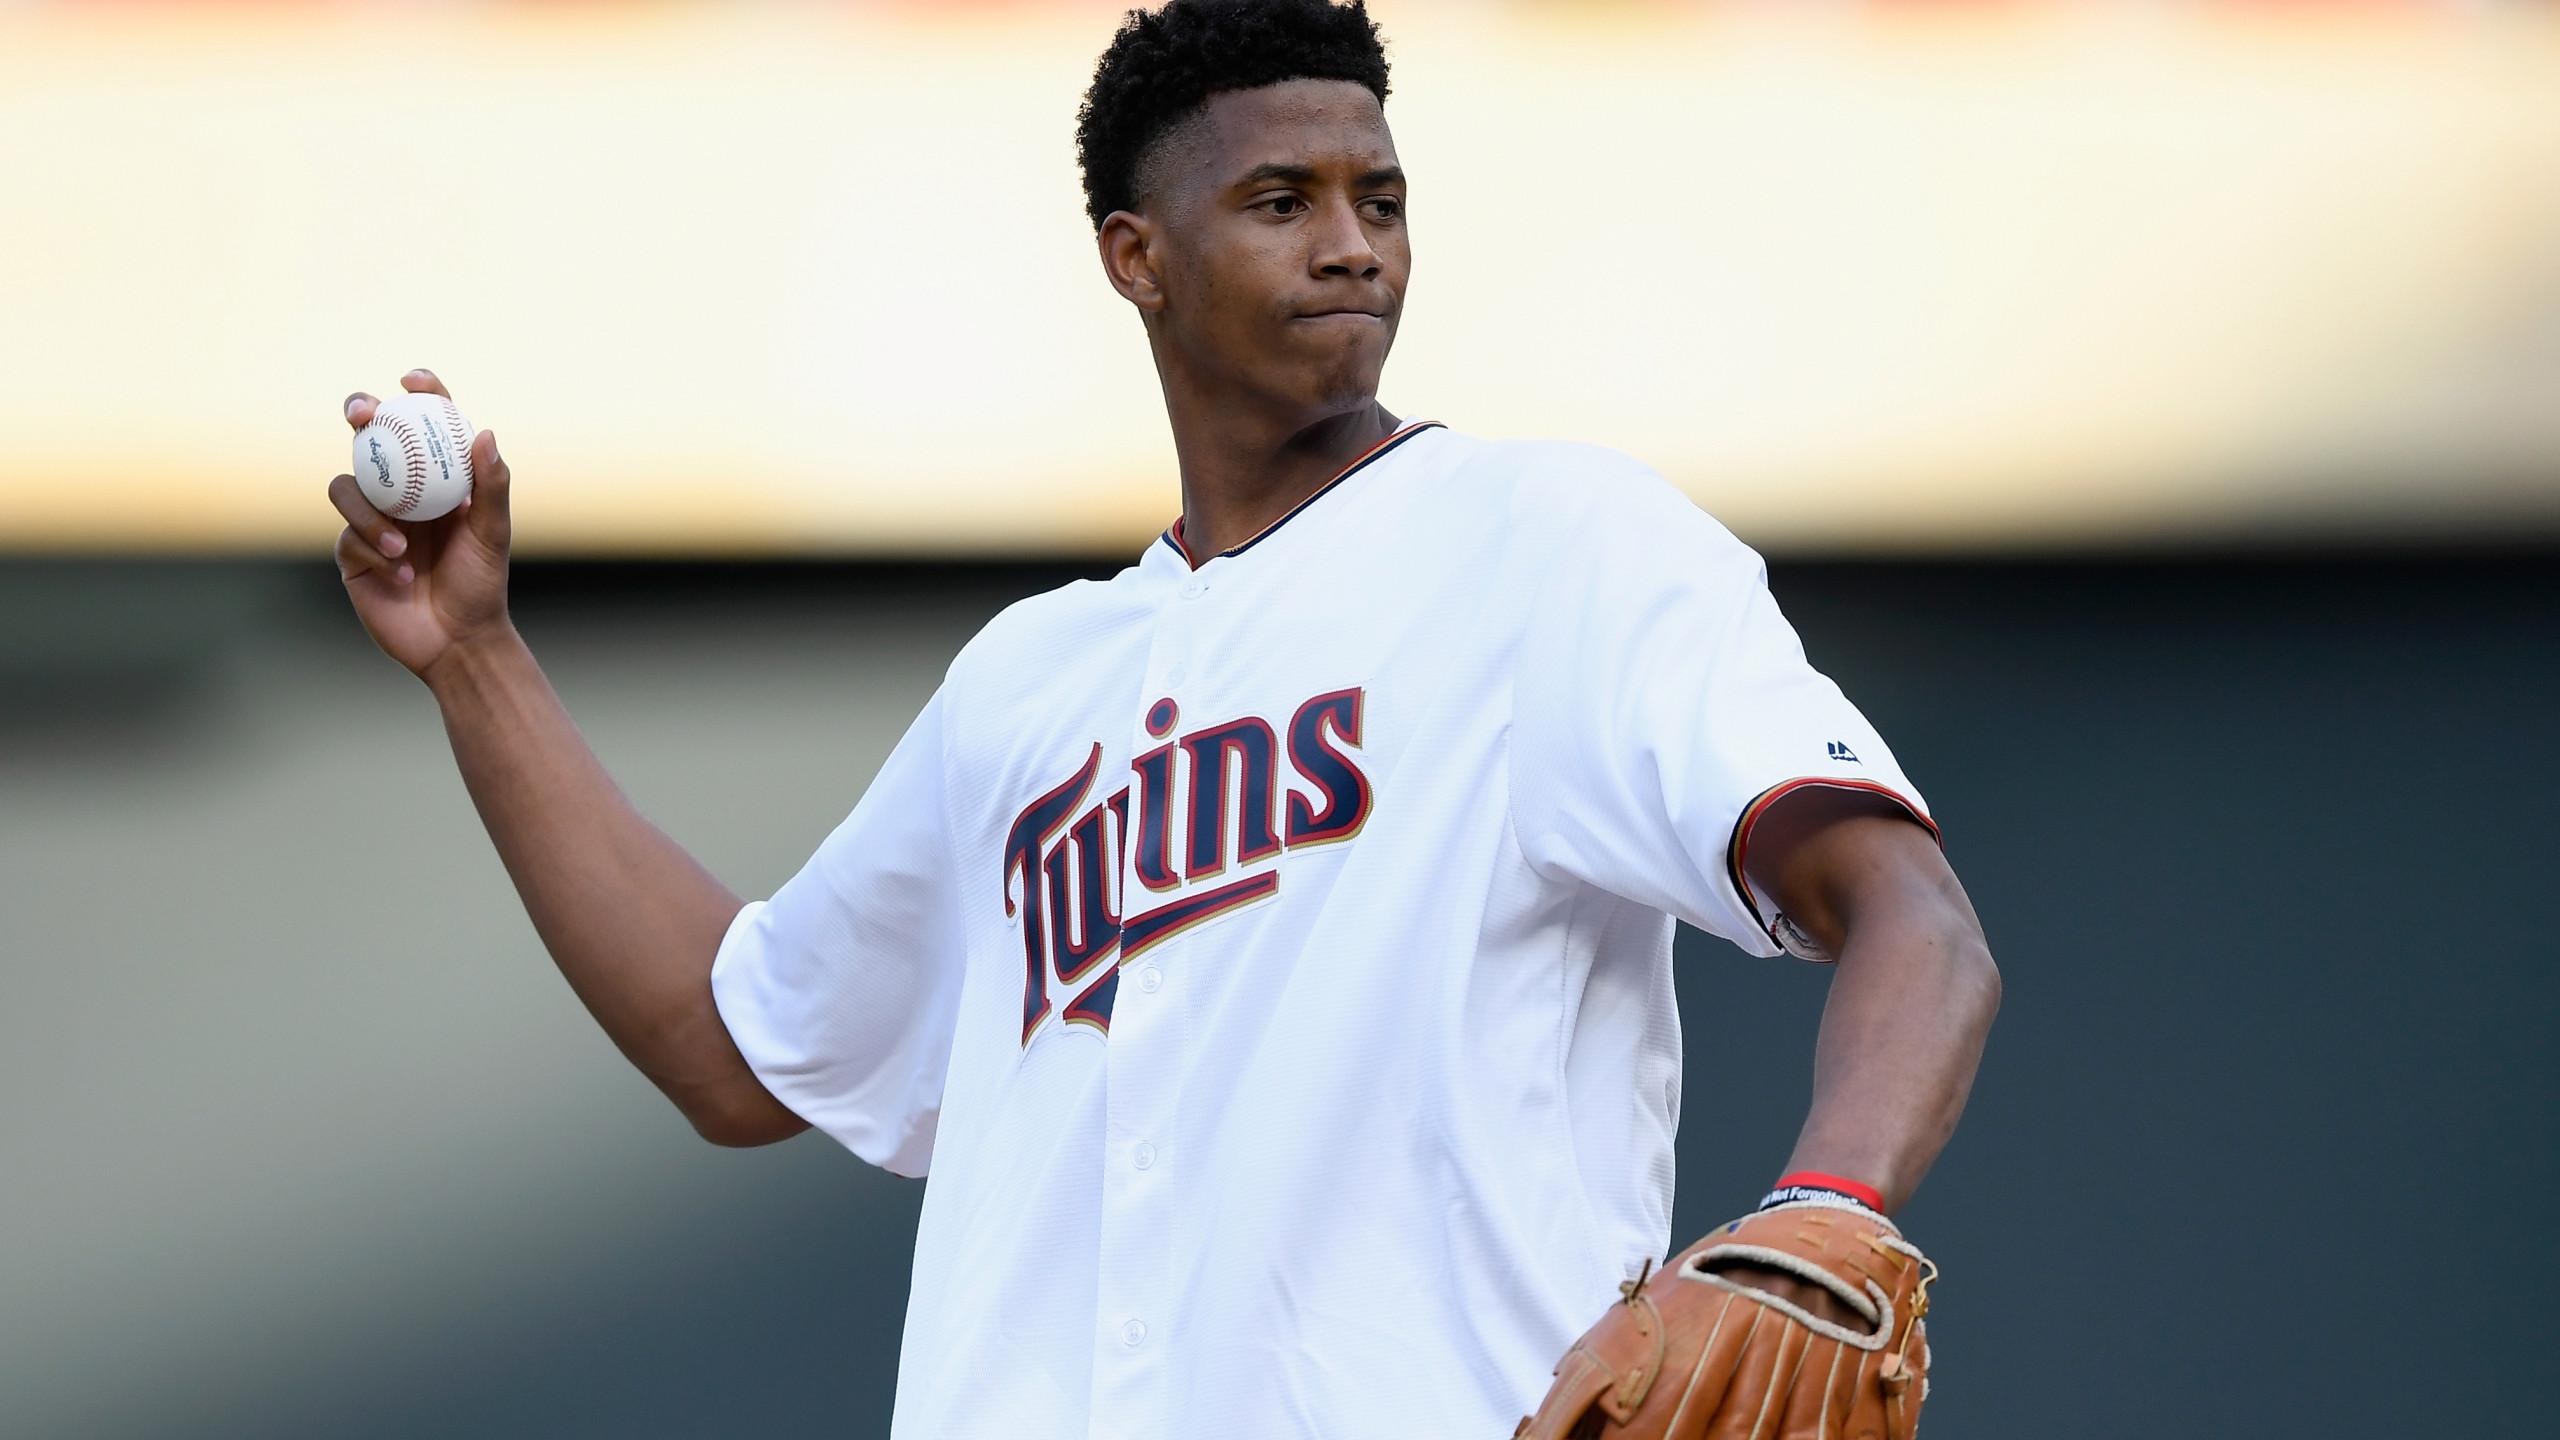 Jarrett Culver throws out first pitch at Twins game. KLBK. KAMC